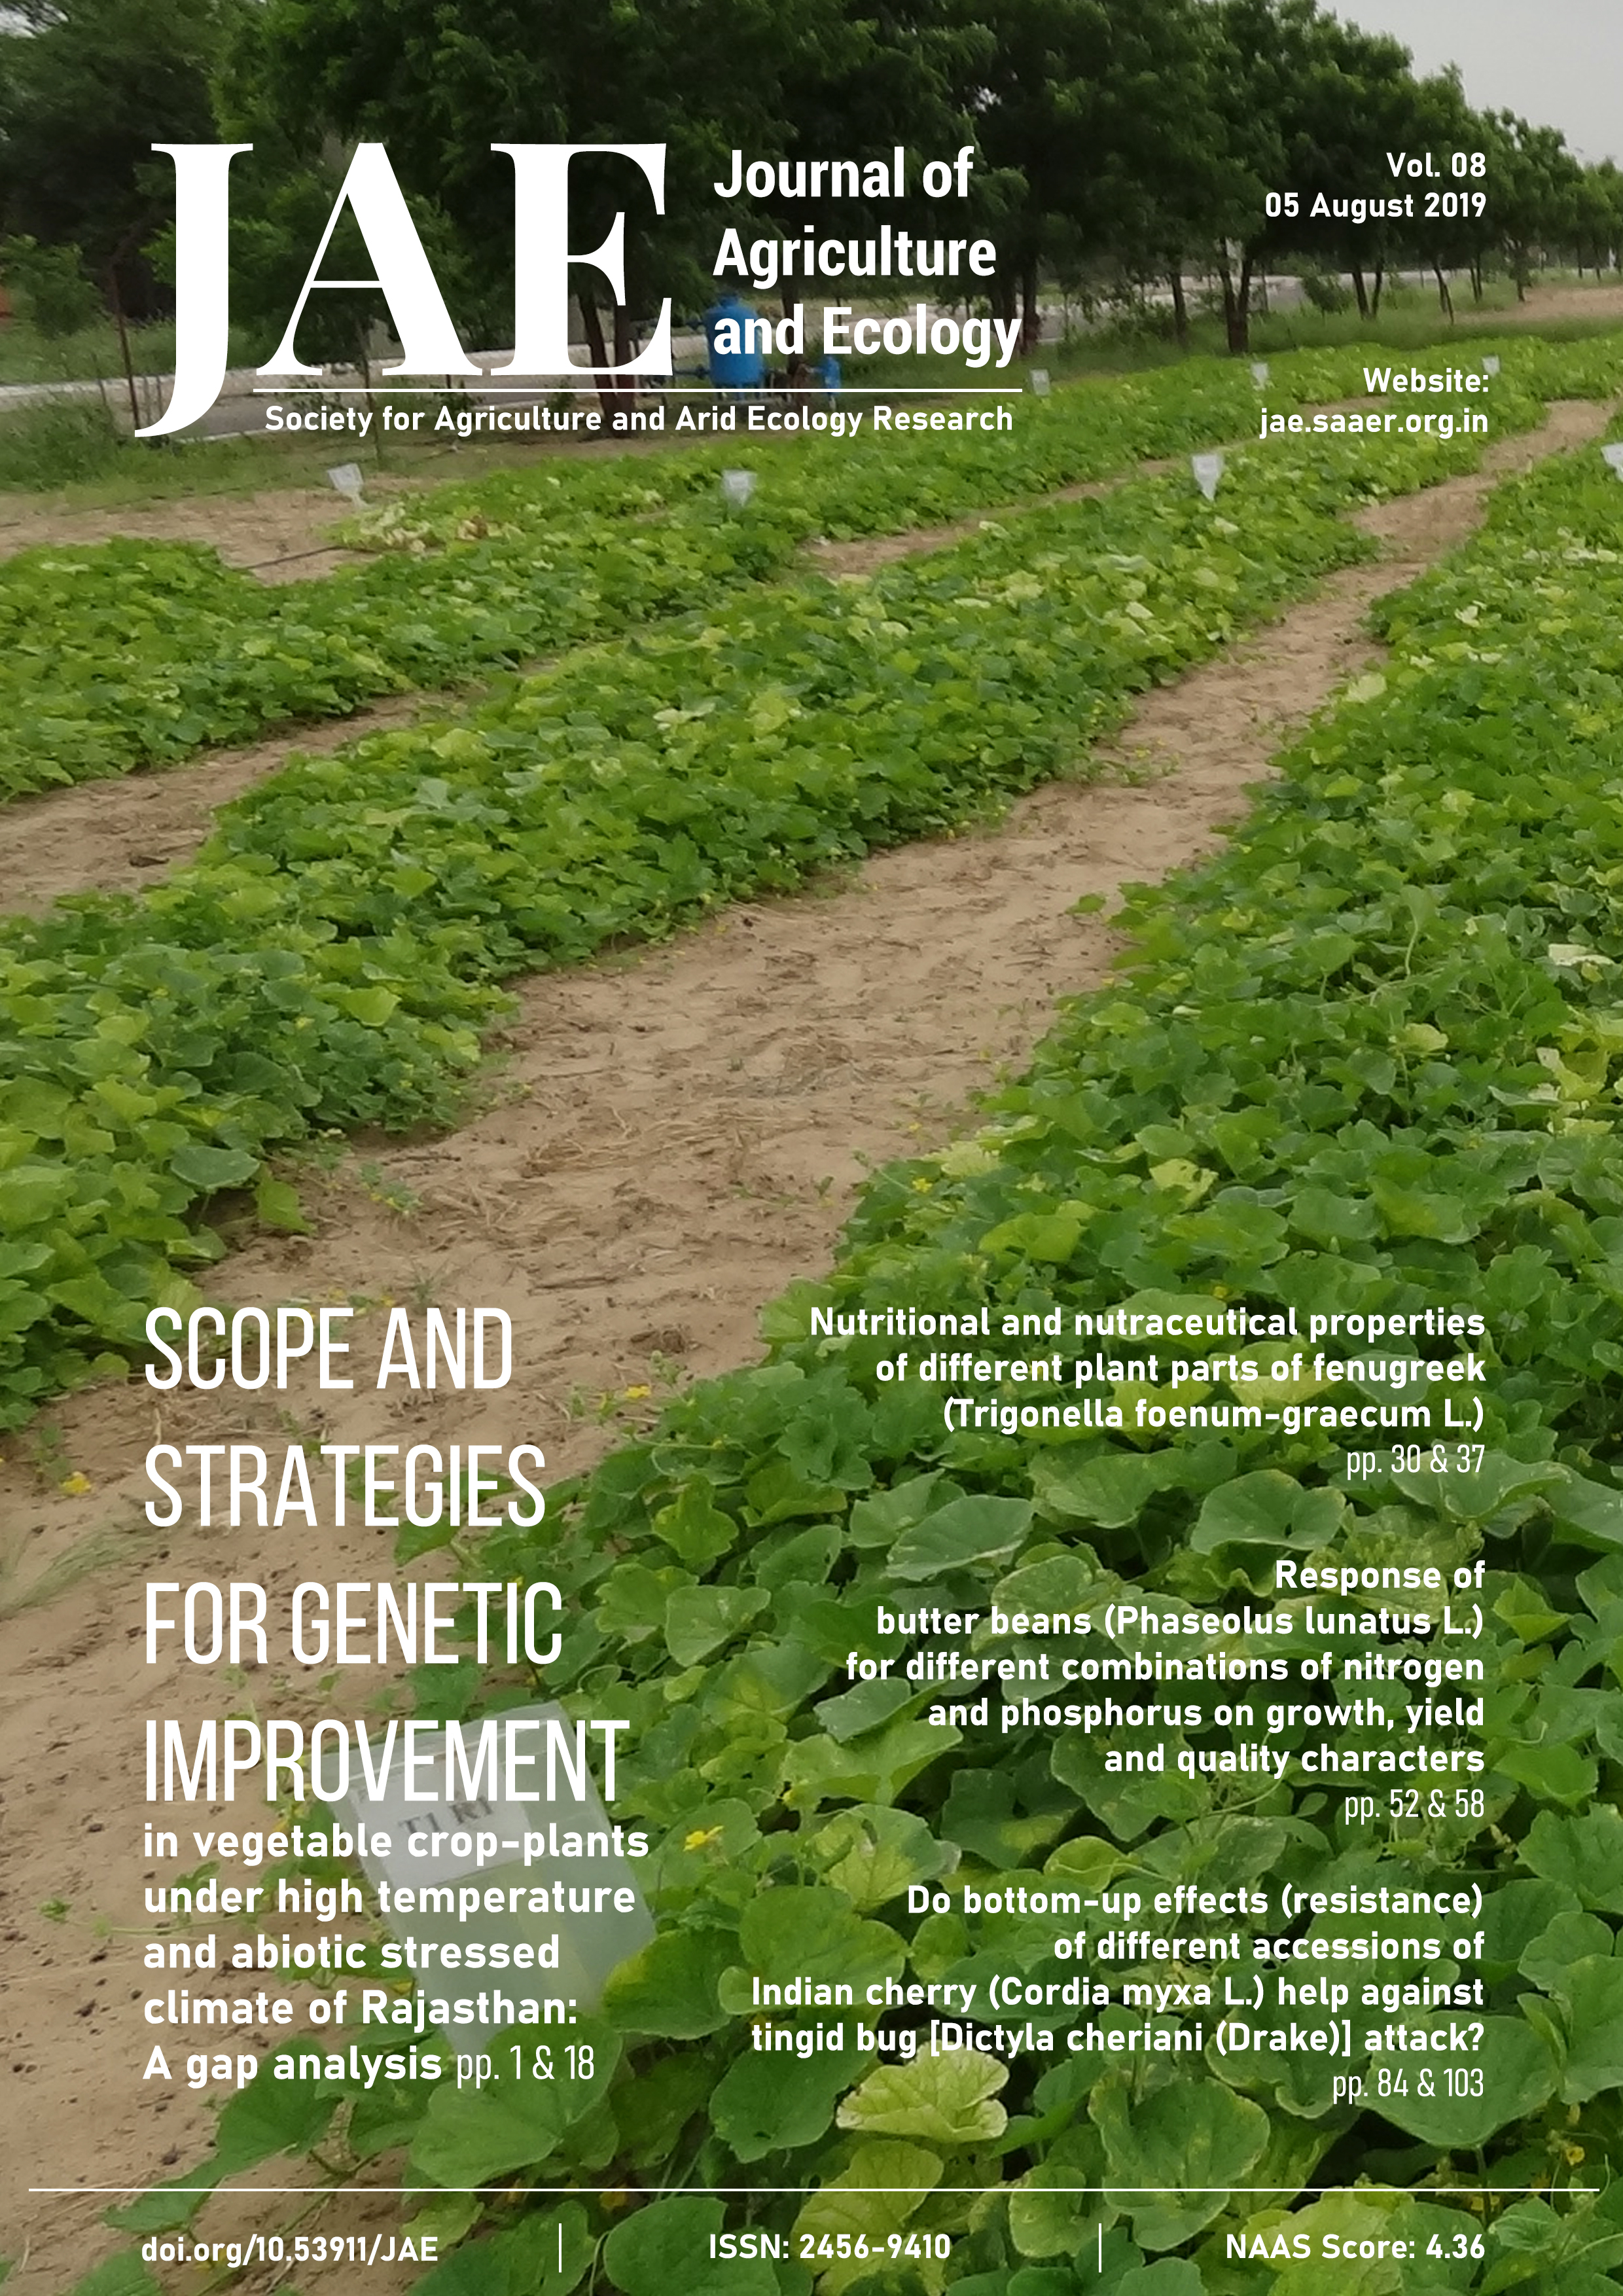 Journal of Agriculture and Ecology Issue 08 Cover